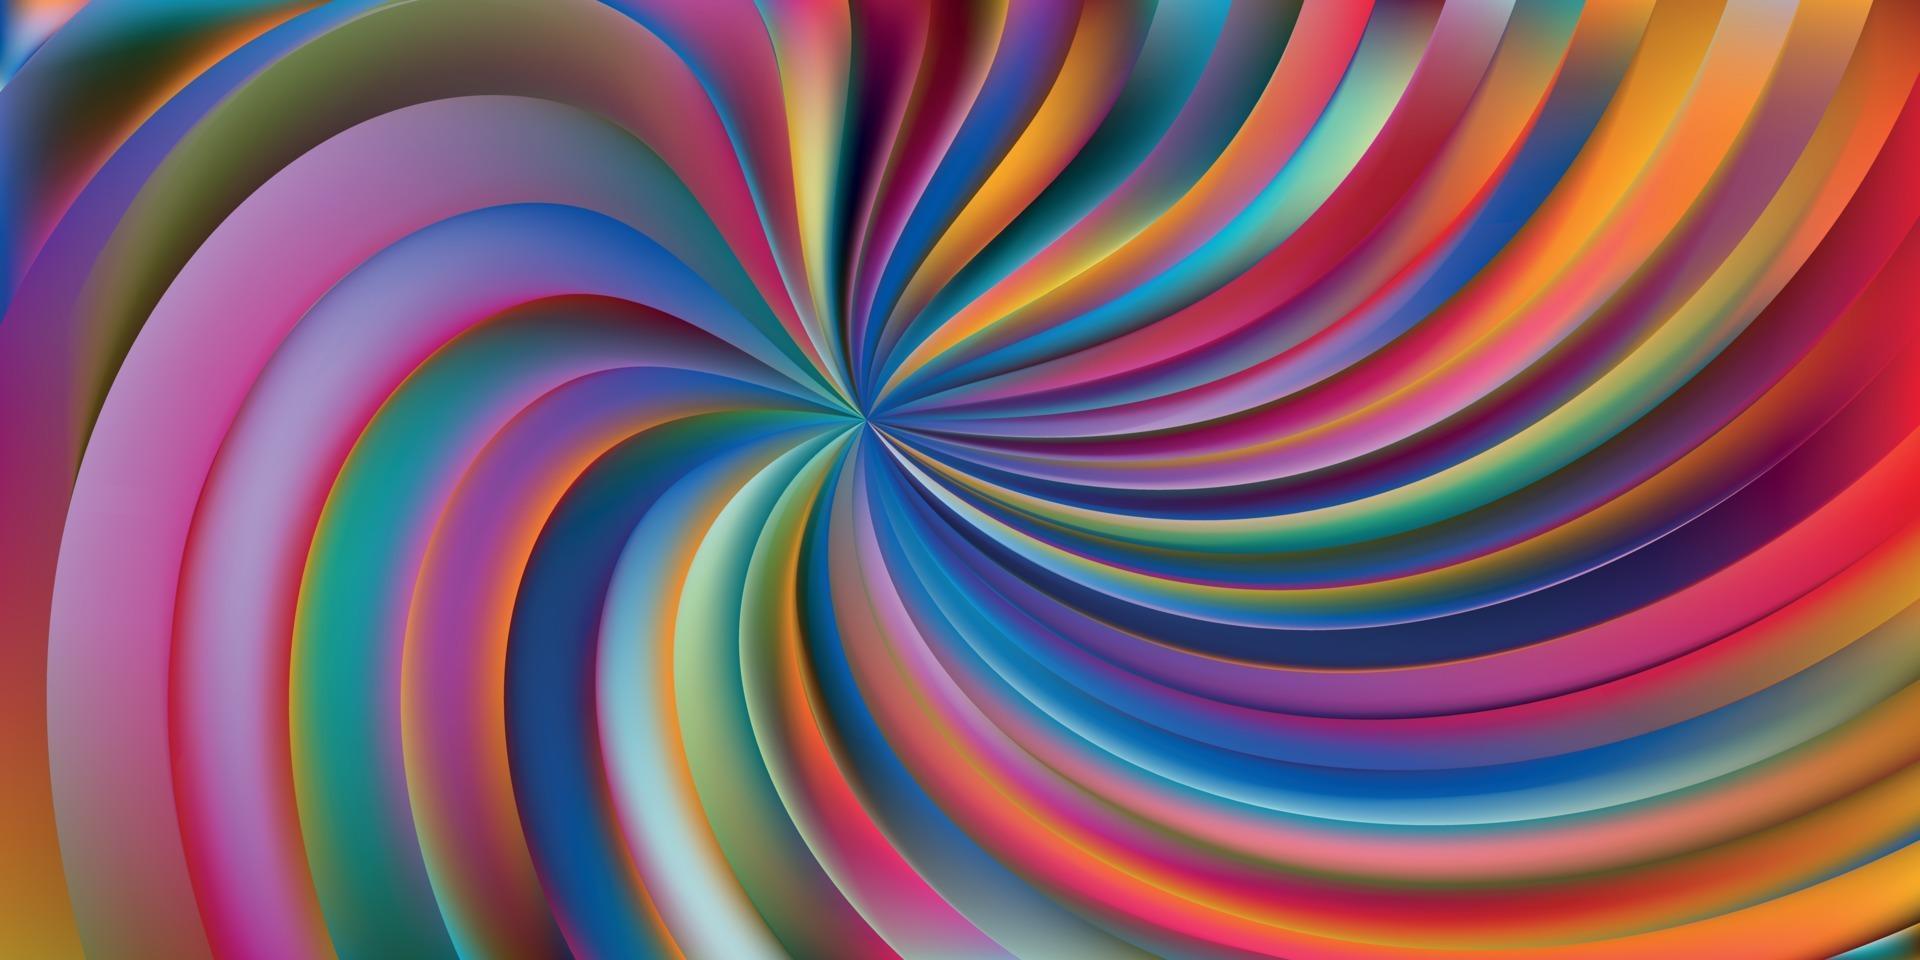 abstract multi color swirl background vector